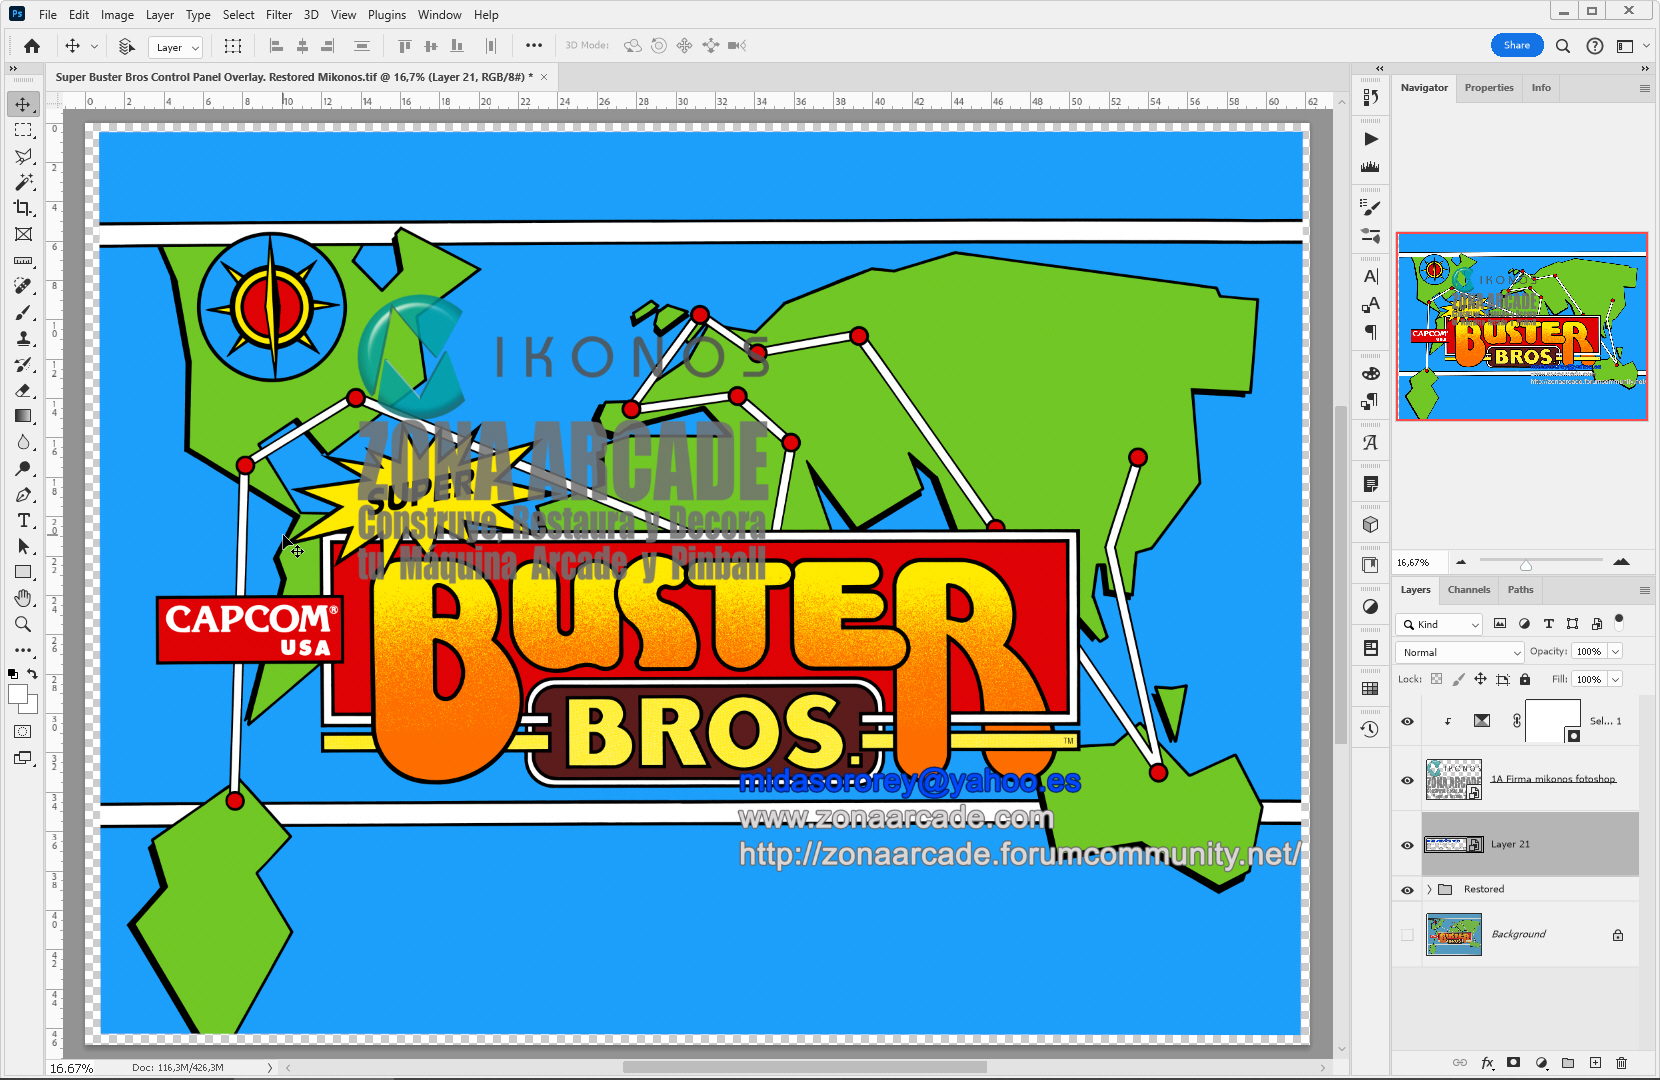 Super-Buster-Bros-Control-Panel-Overlay-Restored-Mikonos2